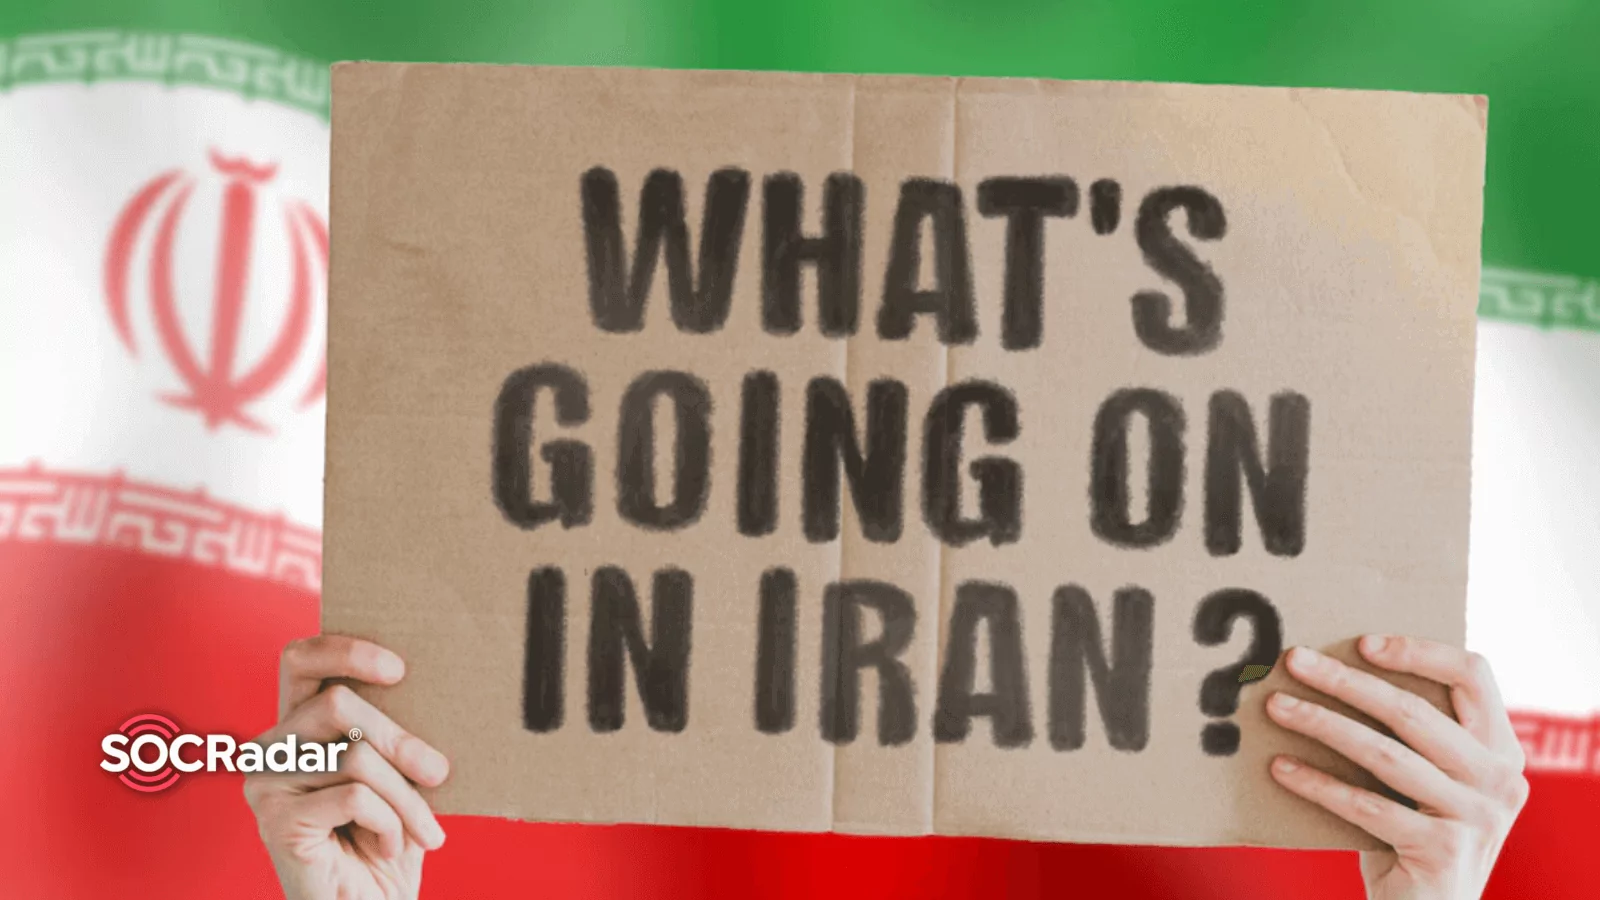 SOCRadar® Cyber Intelligence Inc. | Collective Cyber Attacks by Hacktivists: What’s Going on in Iran?